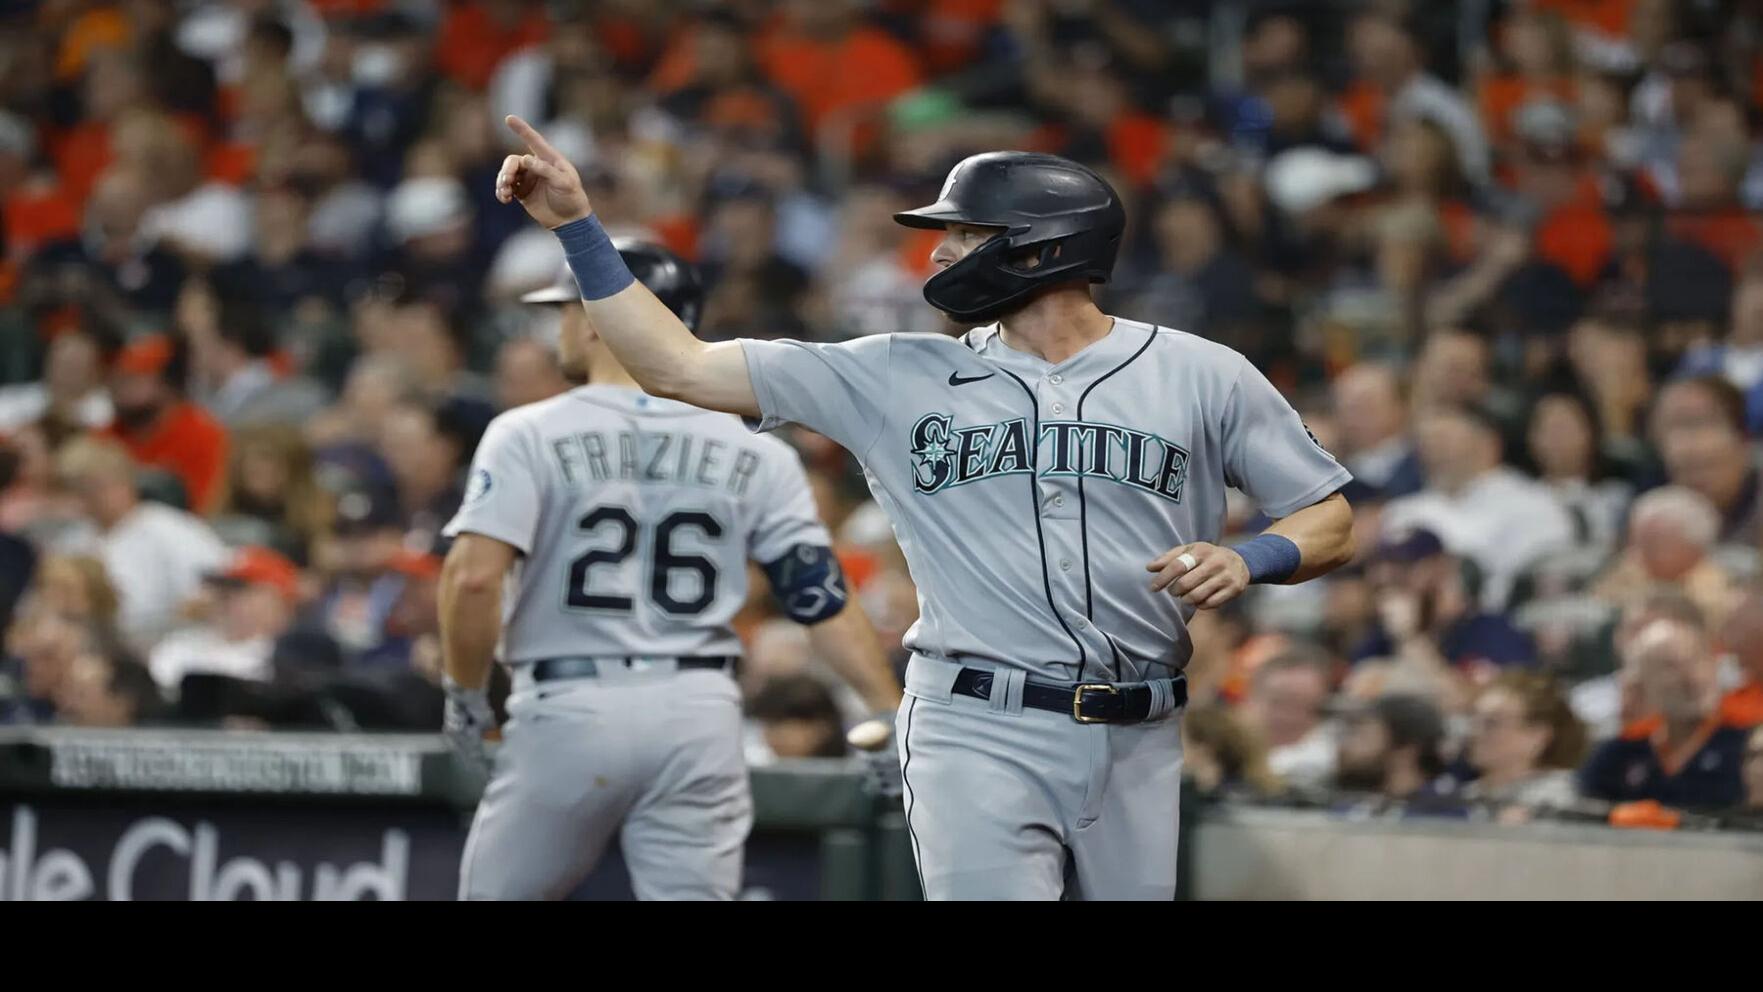 Seattle Mariners wear two different uniforms during spring